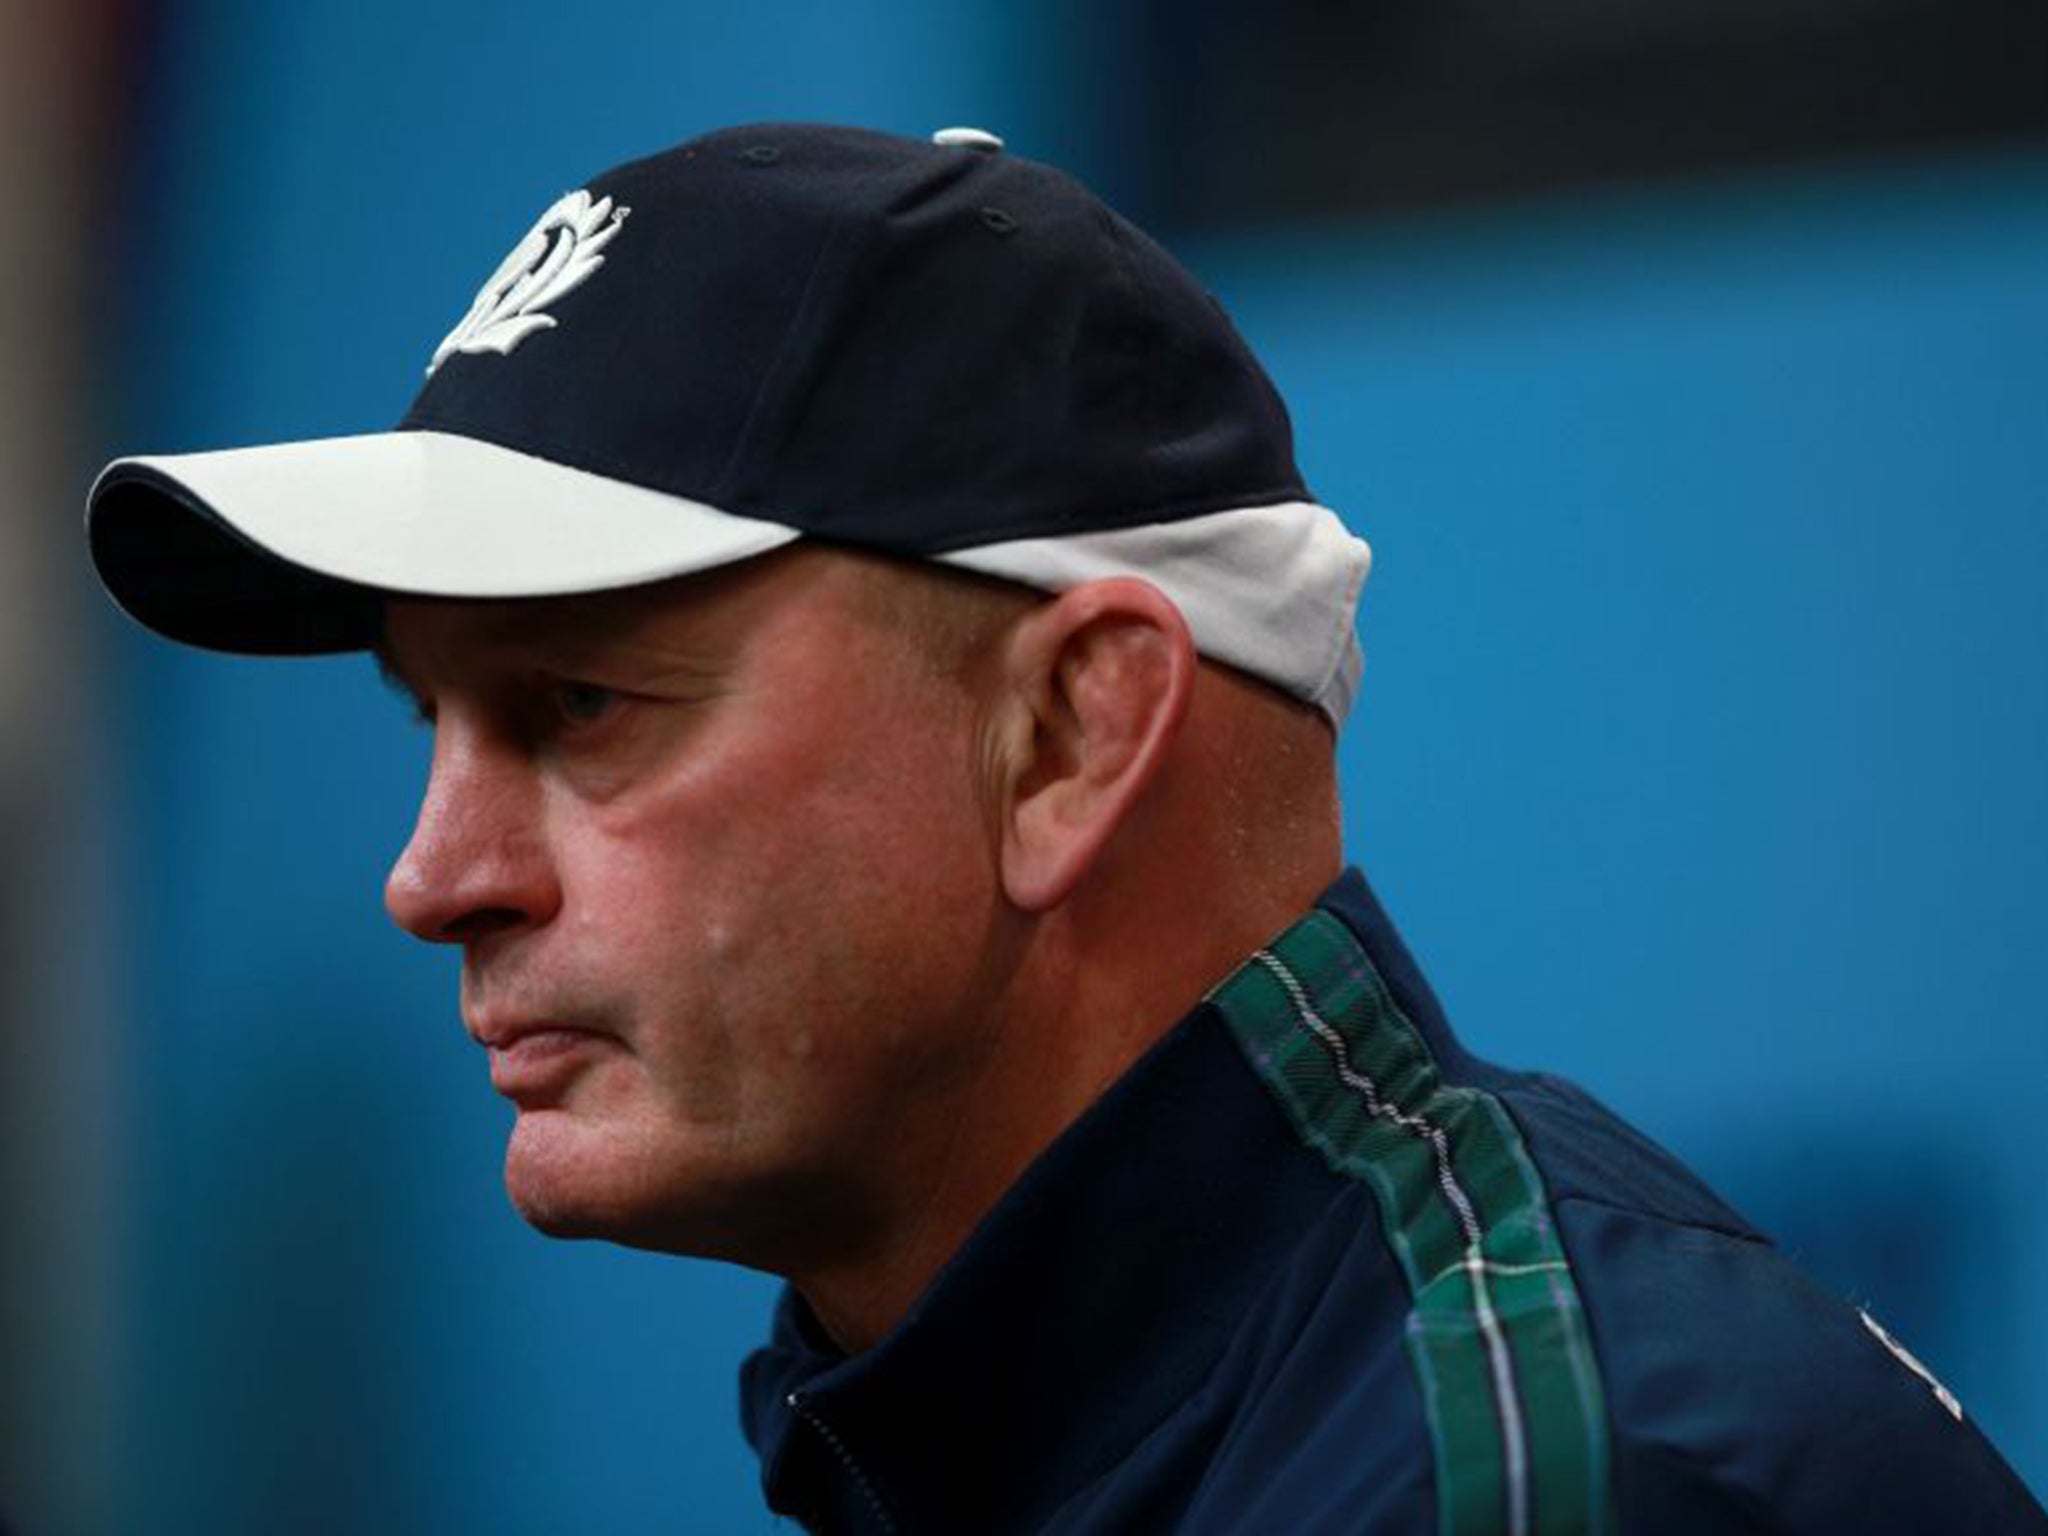 Vern Cotter (NZ) Head coach, Scotland, 53, contracted until 2017. Hard-nosed Kiwi forwards expert, starting to turn Scotland round. Edges out compatriot Joe Schmidt as he suits English needs better. Has European club experience, winning French league with Clermont Auvergne